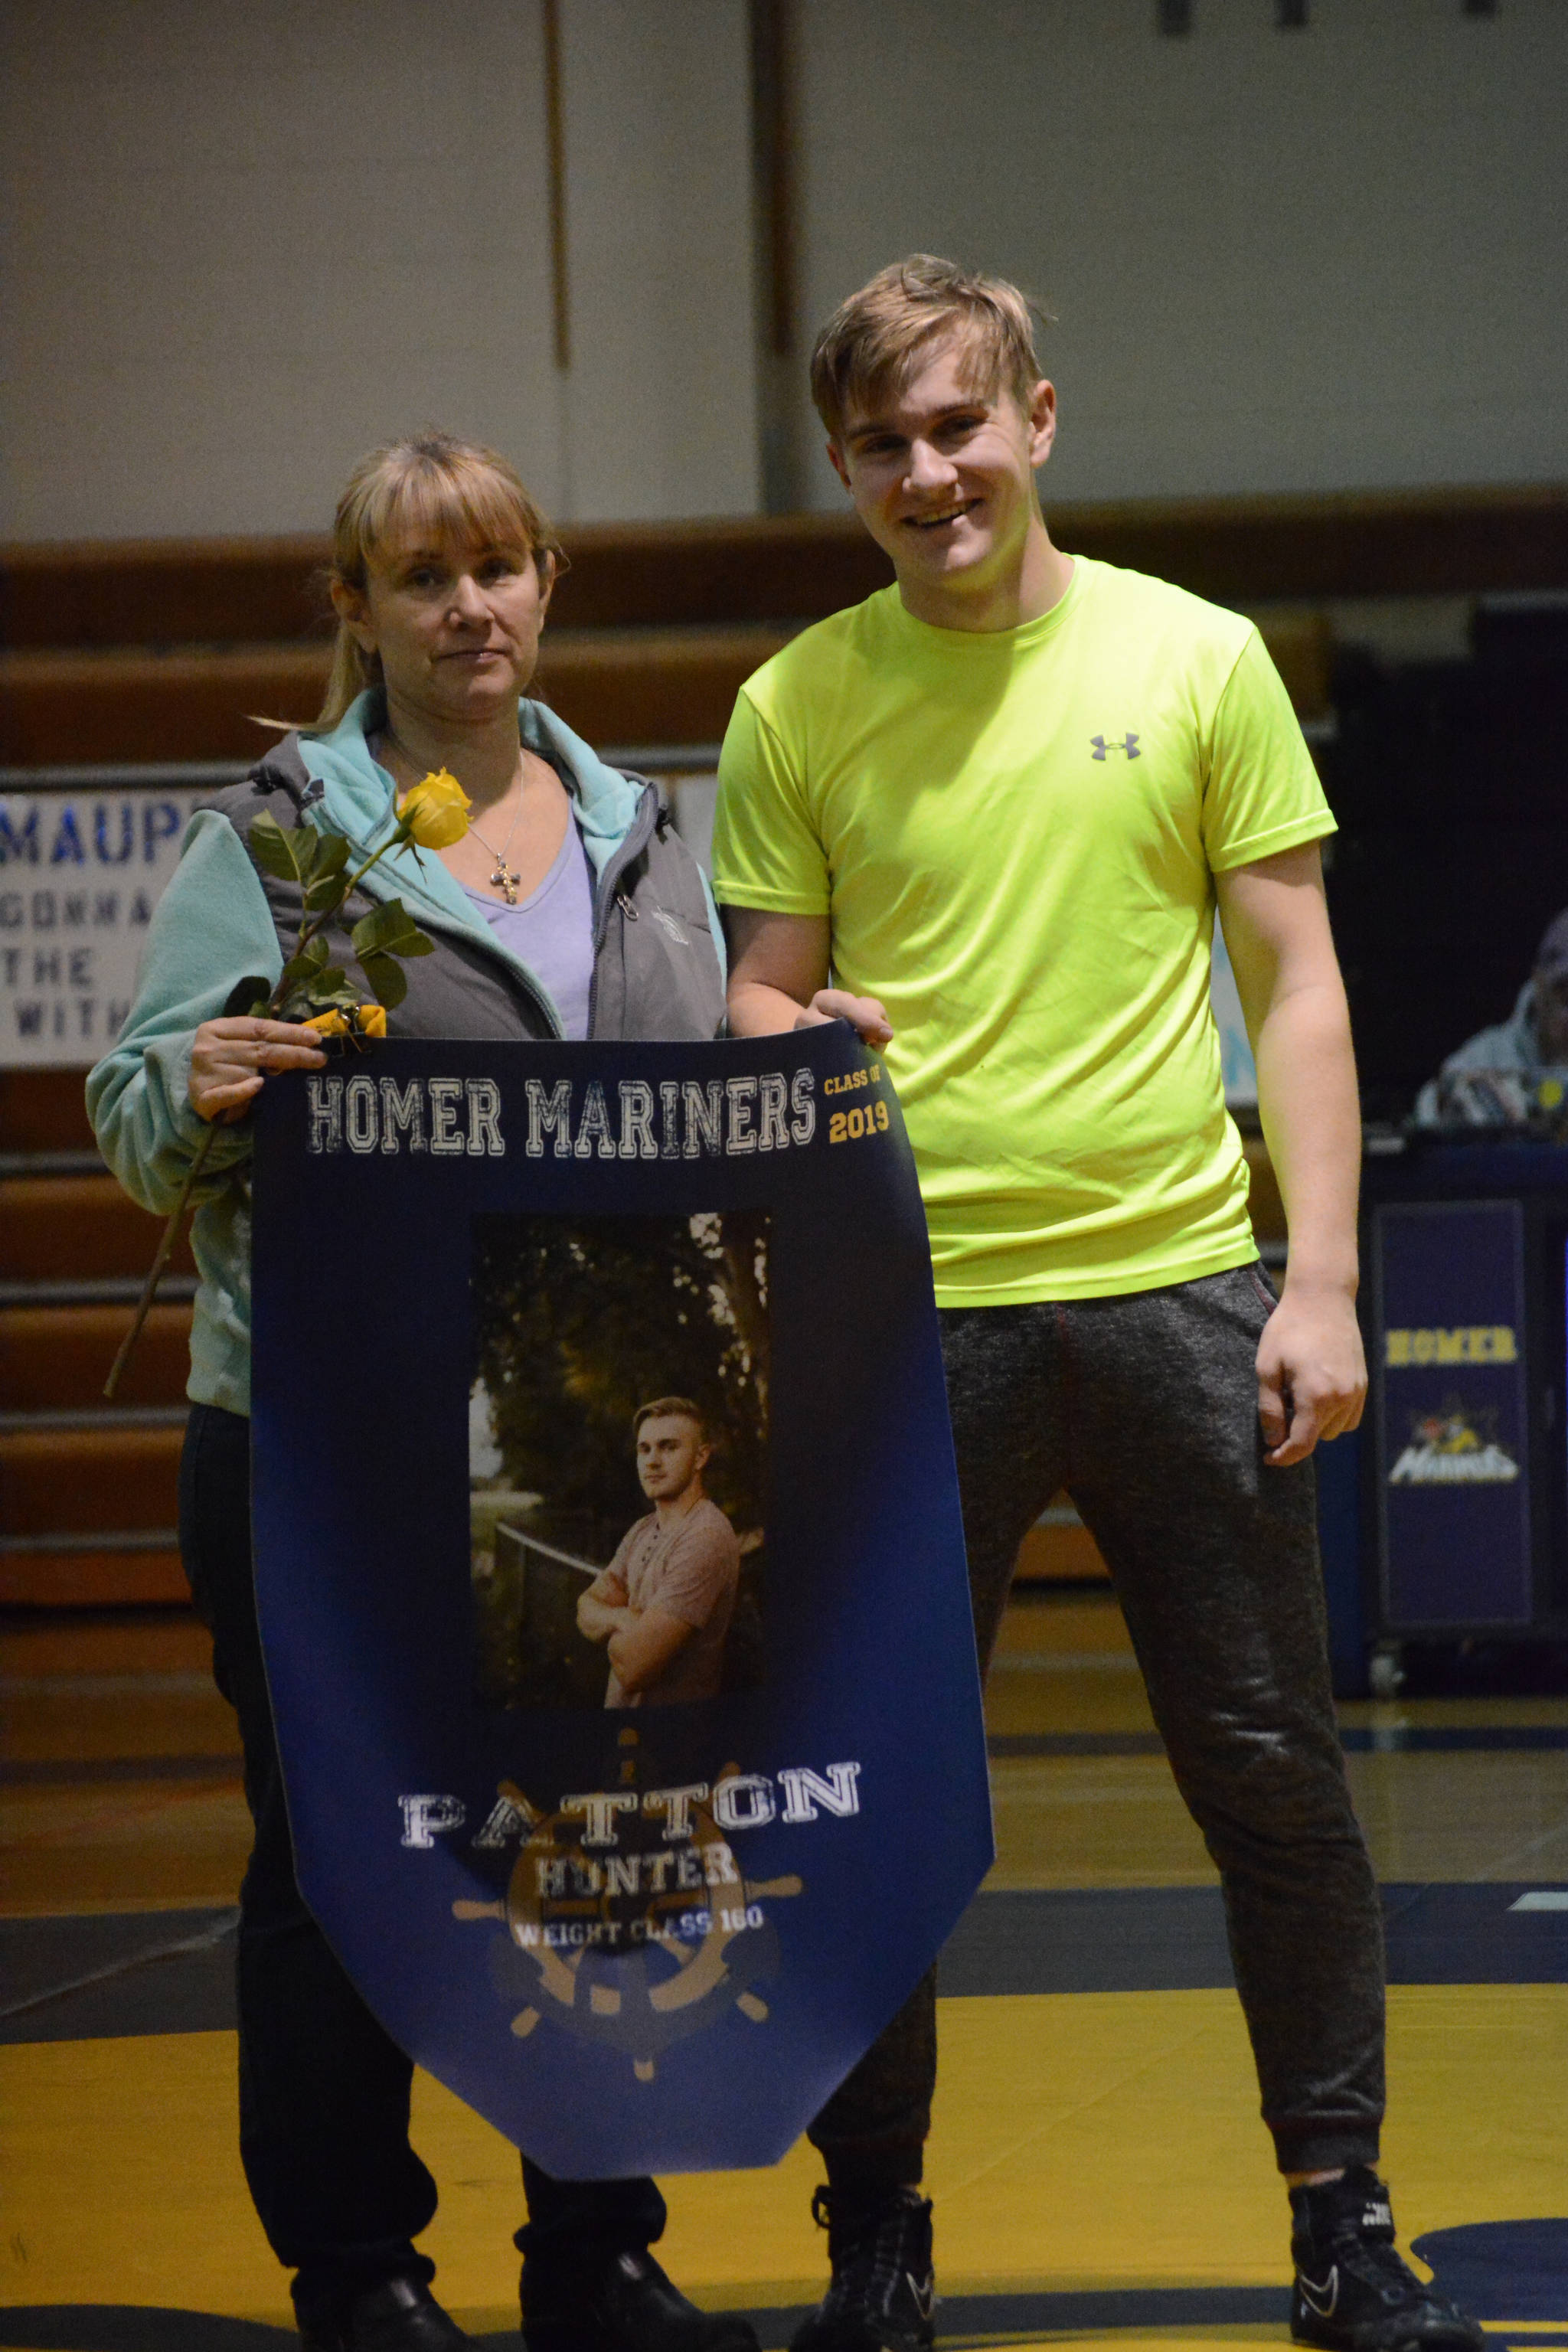 Hunter Patton holds a banner recognizing him at Senior Night, the Homer-Kenai dual wrestling meet held Nov. 21, 2018, in the Homer High School Alice Witte Gym, Homer, Alaska. Supporting him is his mother, Lyn Patton, and father, Tom Patton, not shown. (Photo by Michael Armstrong/Homer News)